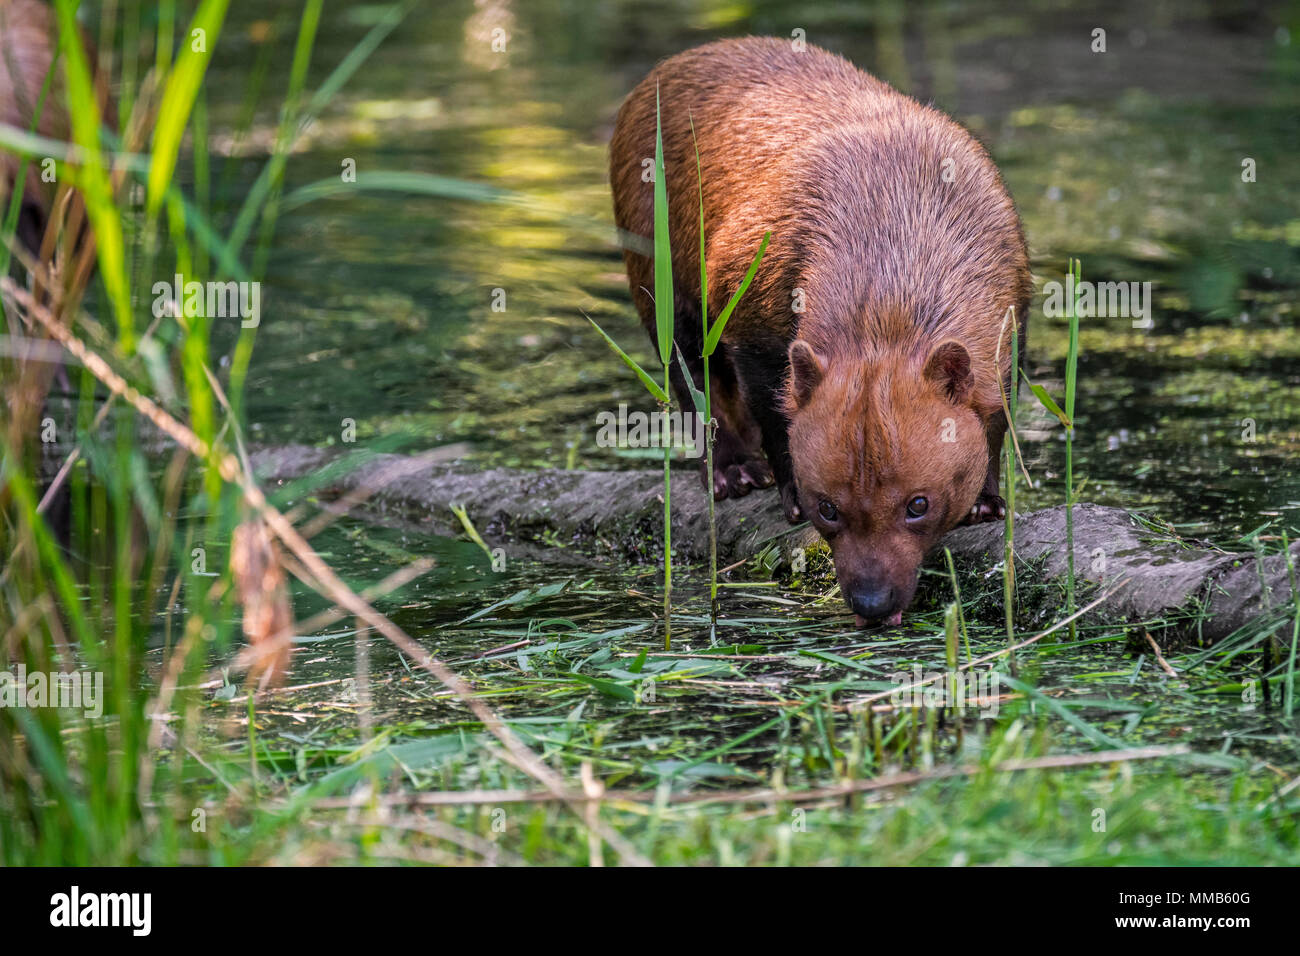 Bush dog (Speothos venaticus) canid native to Central and South America, drinking water from pond Stock Photo